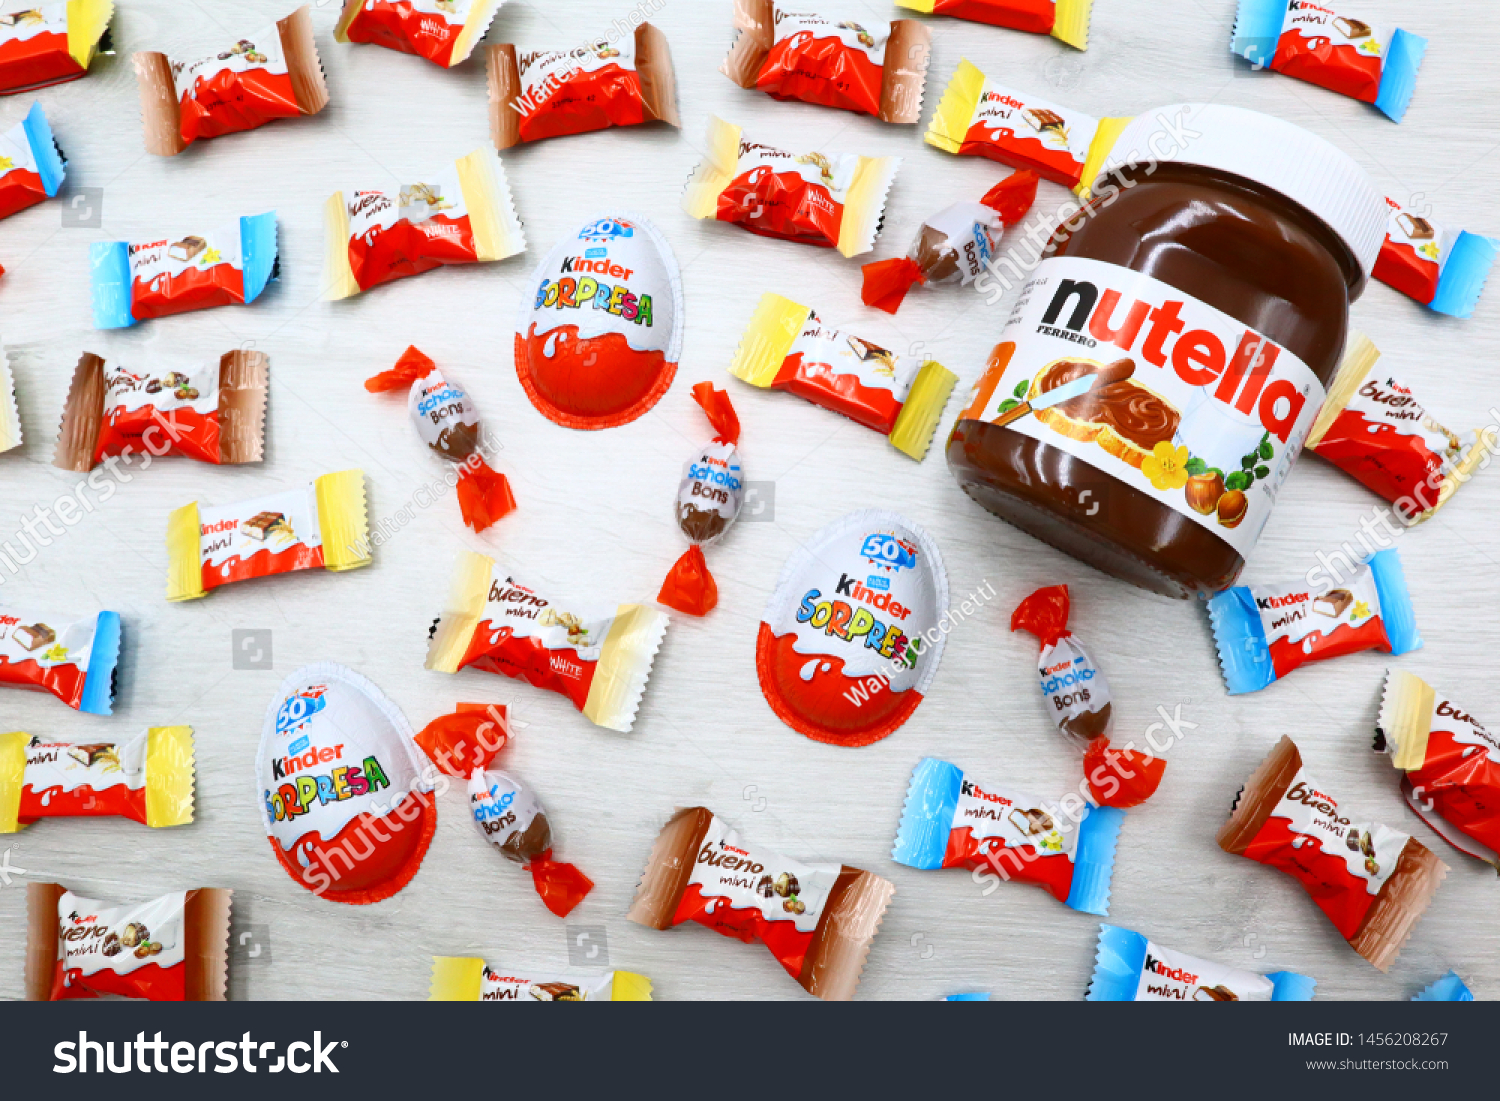 nutella and kinder